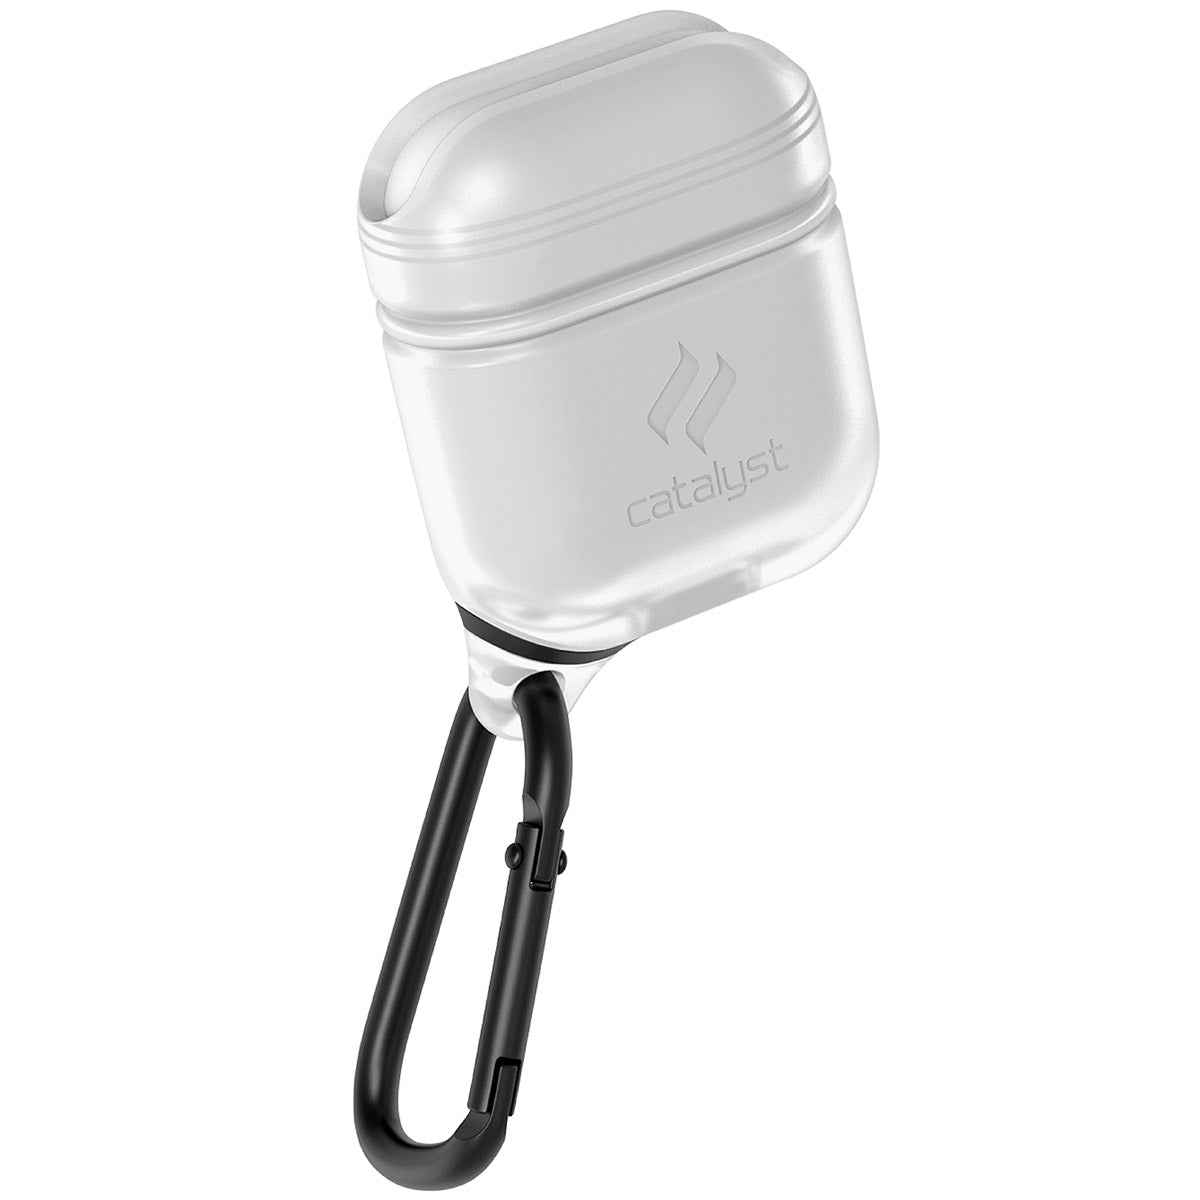 Catalyst airpods gen2/1 waterproof case + carabiner showing the front view of the case in frost white